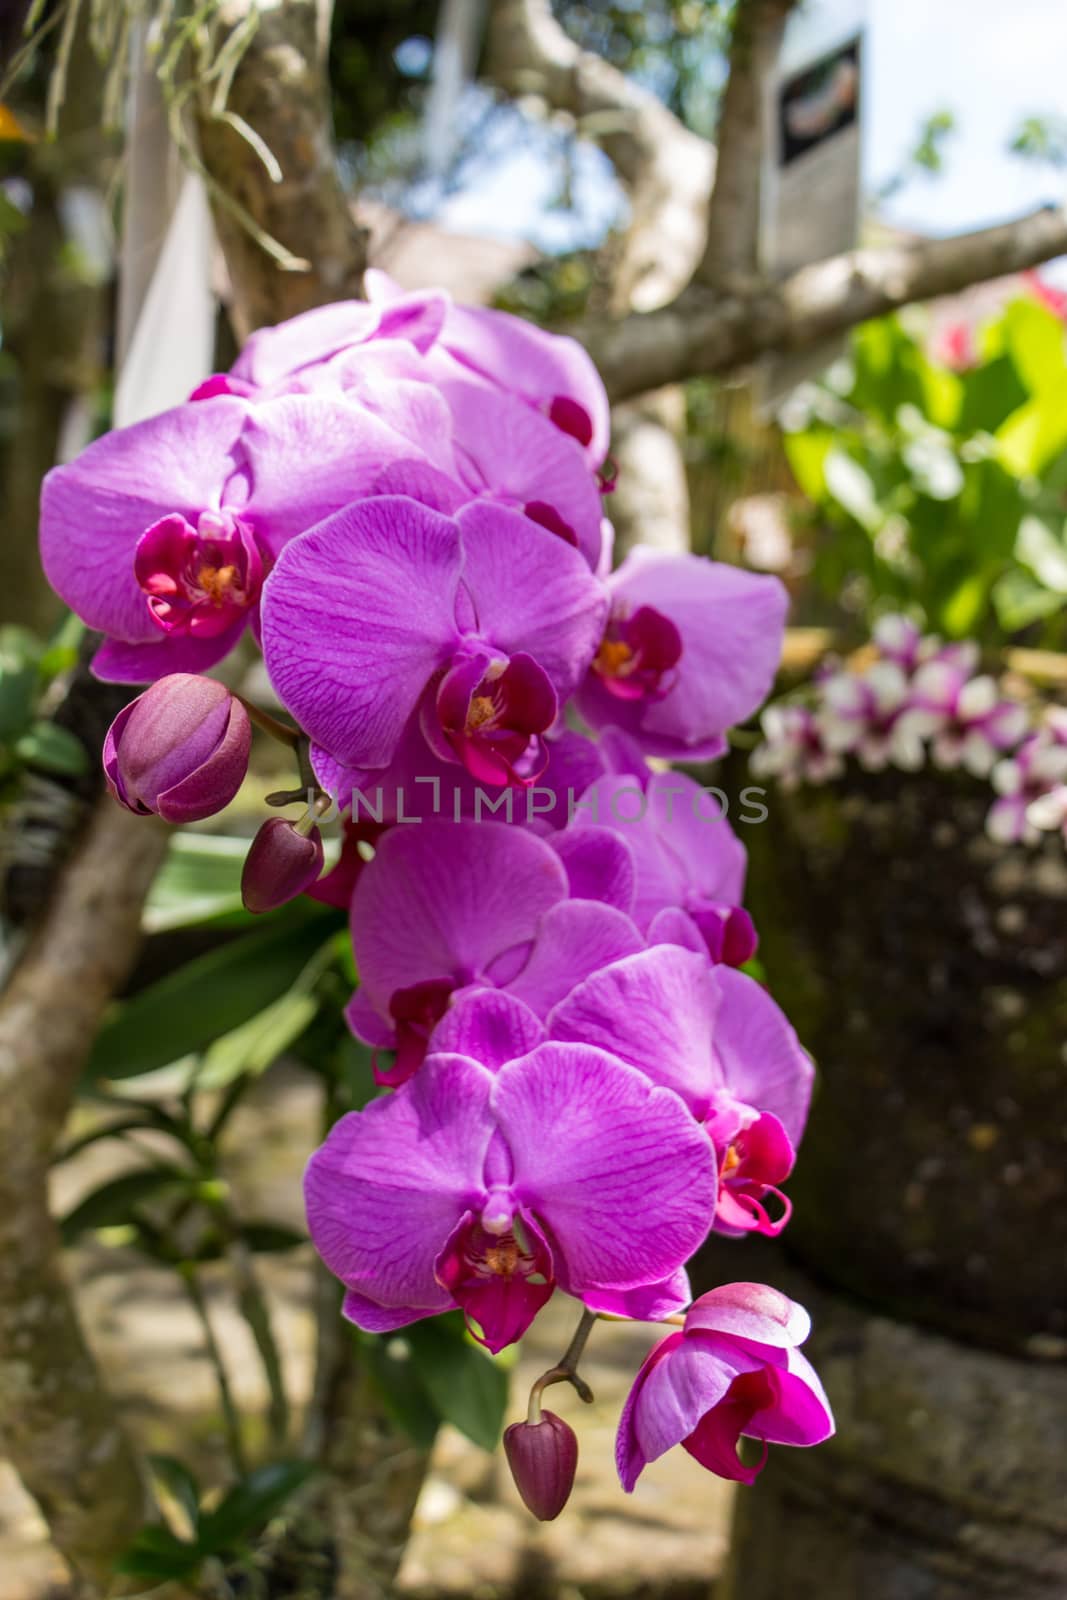 Spike of beautiful exotic purple Phalaenopsis orchids growing outdoors in a garden in Bali